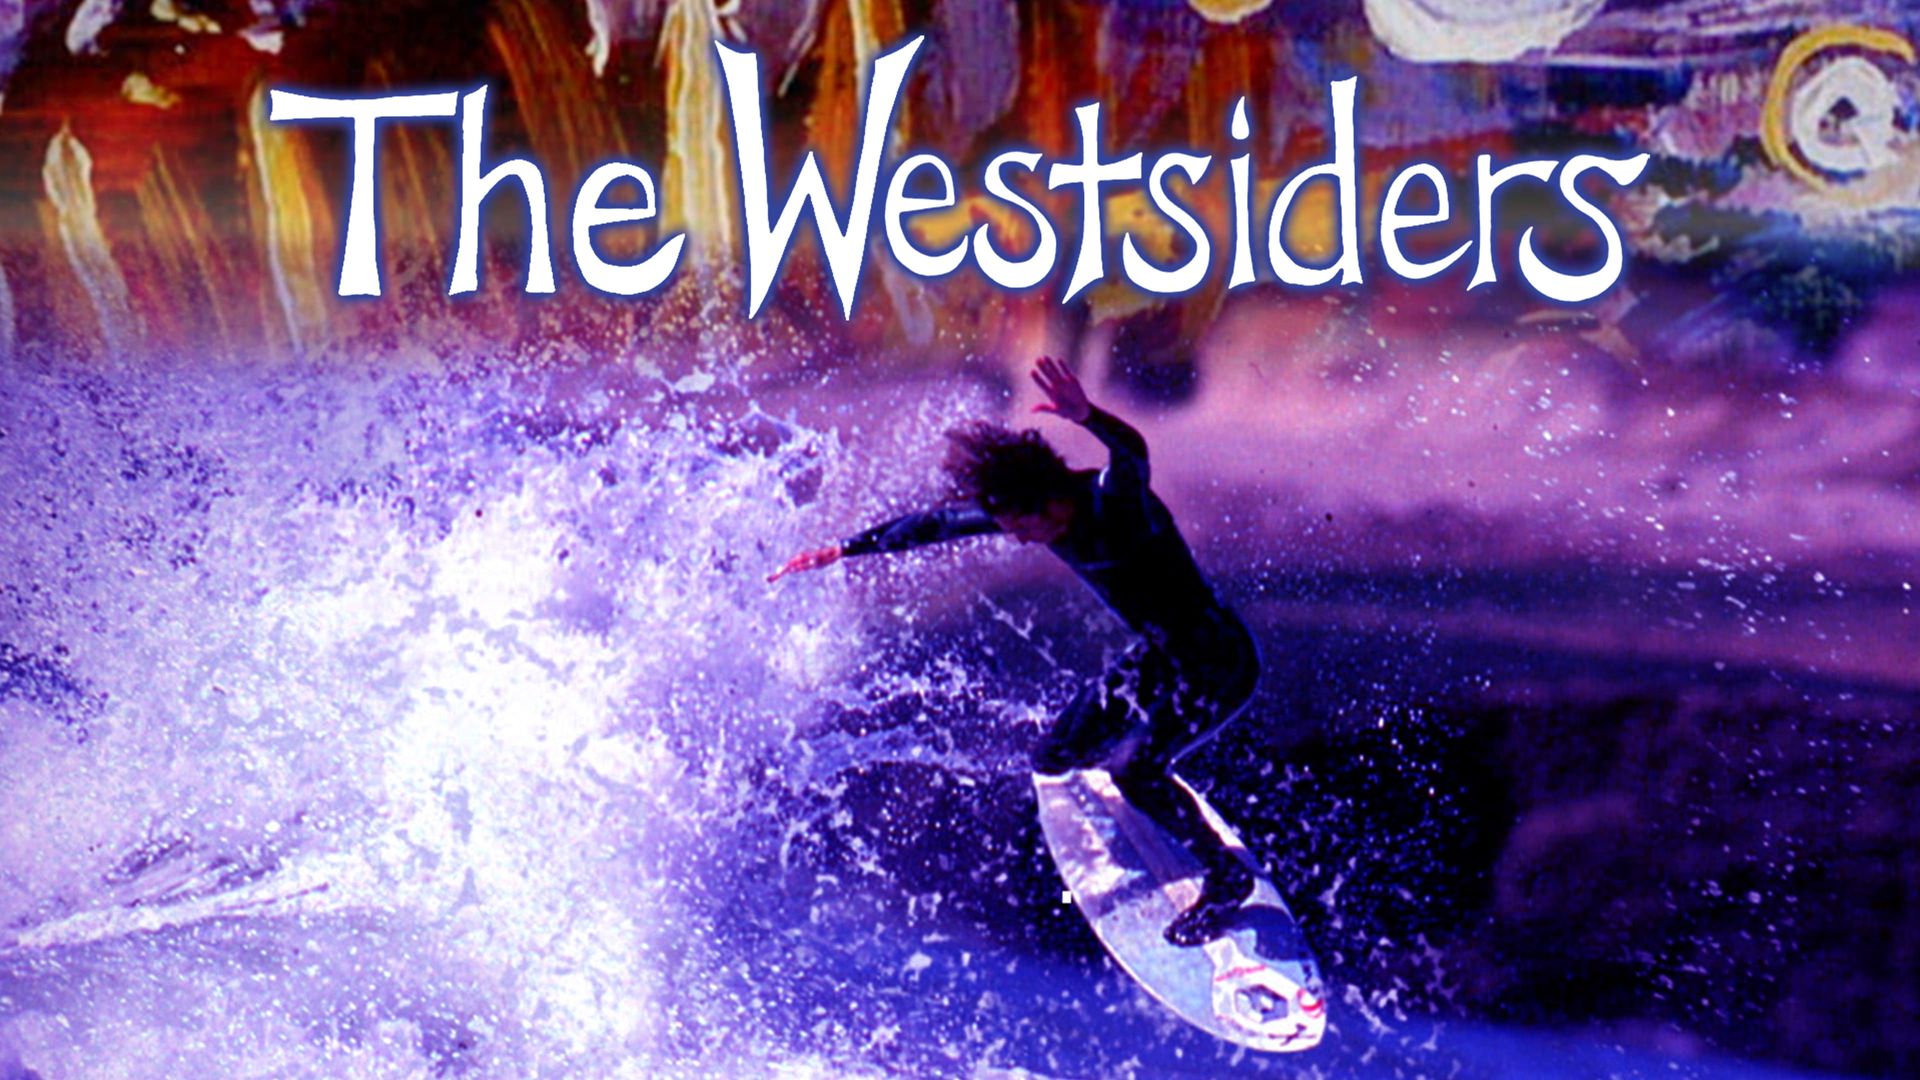 The Westsiders background